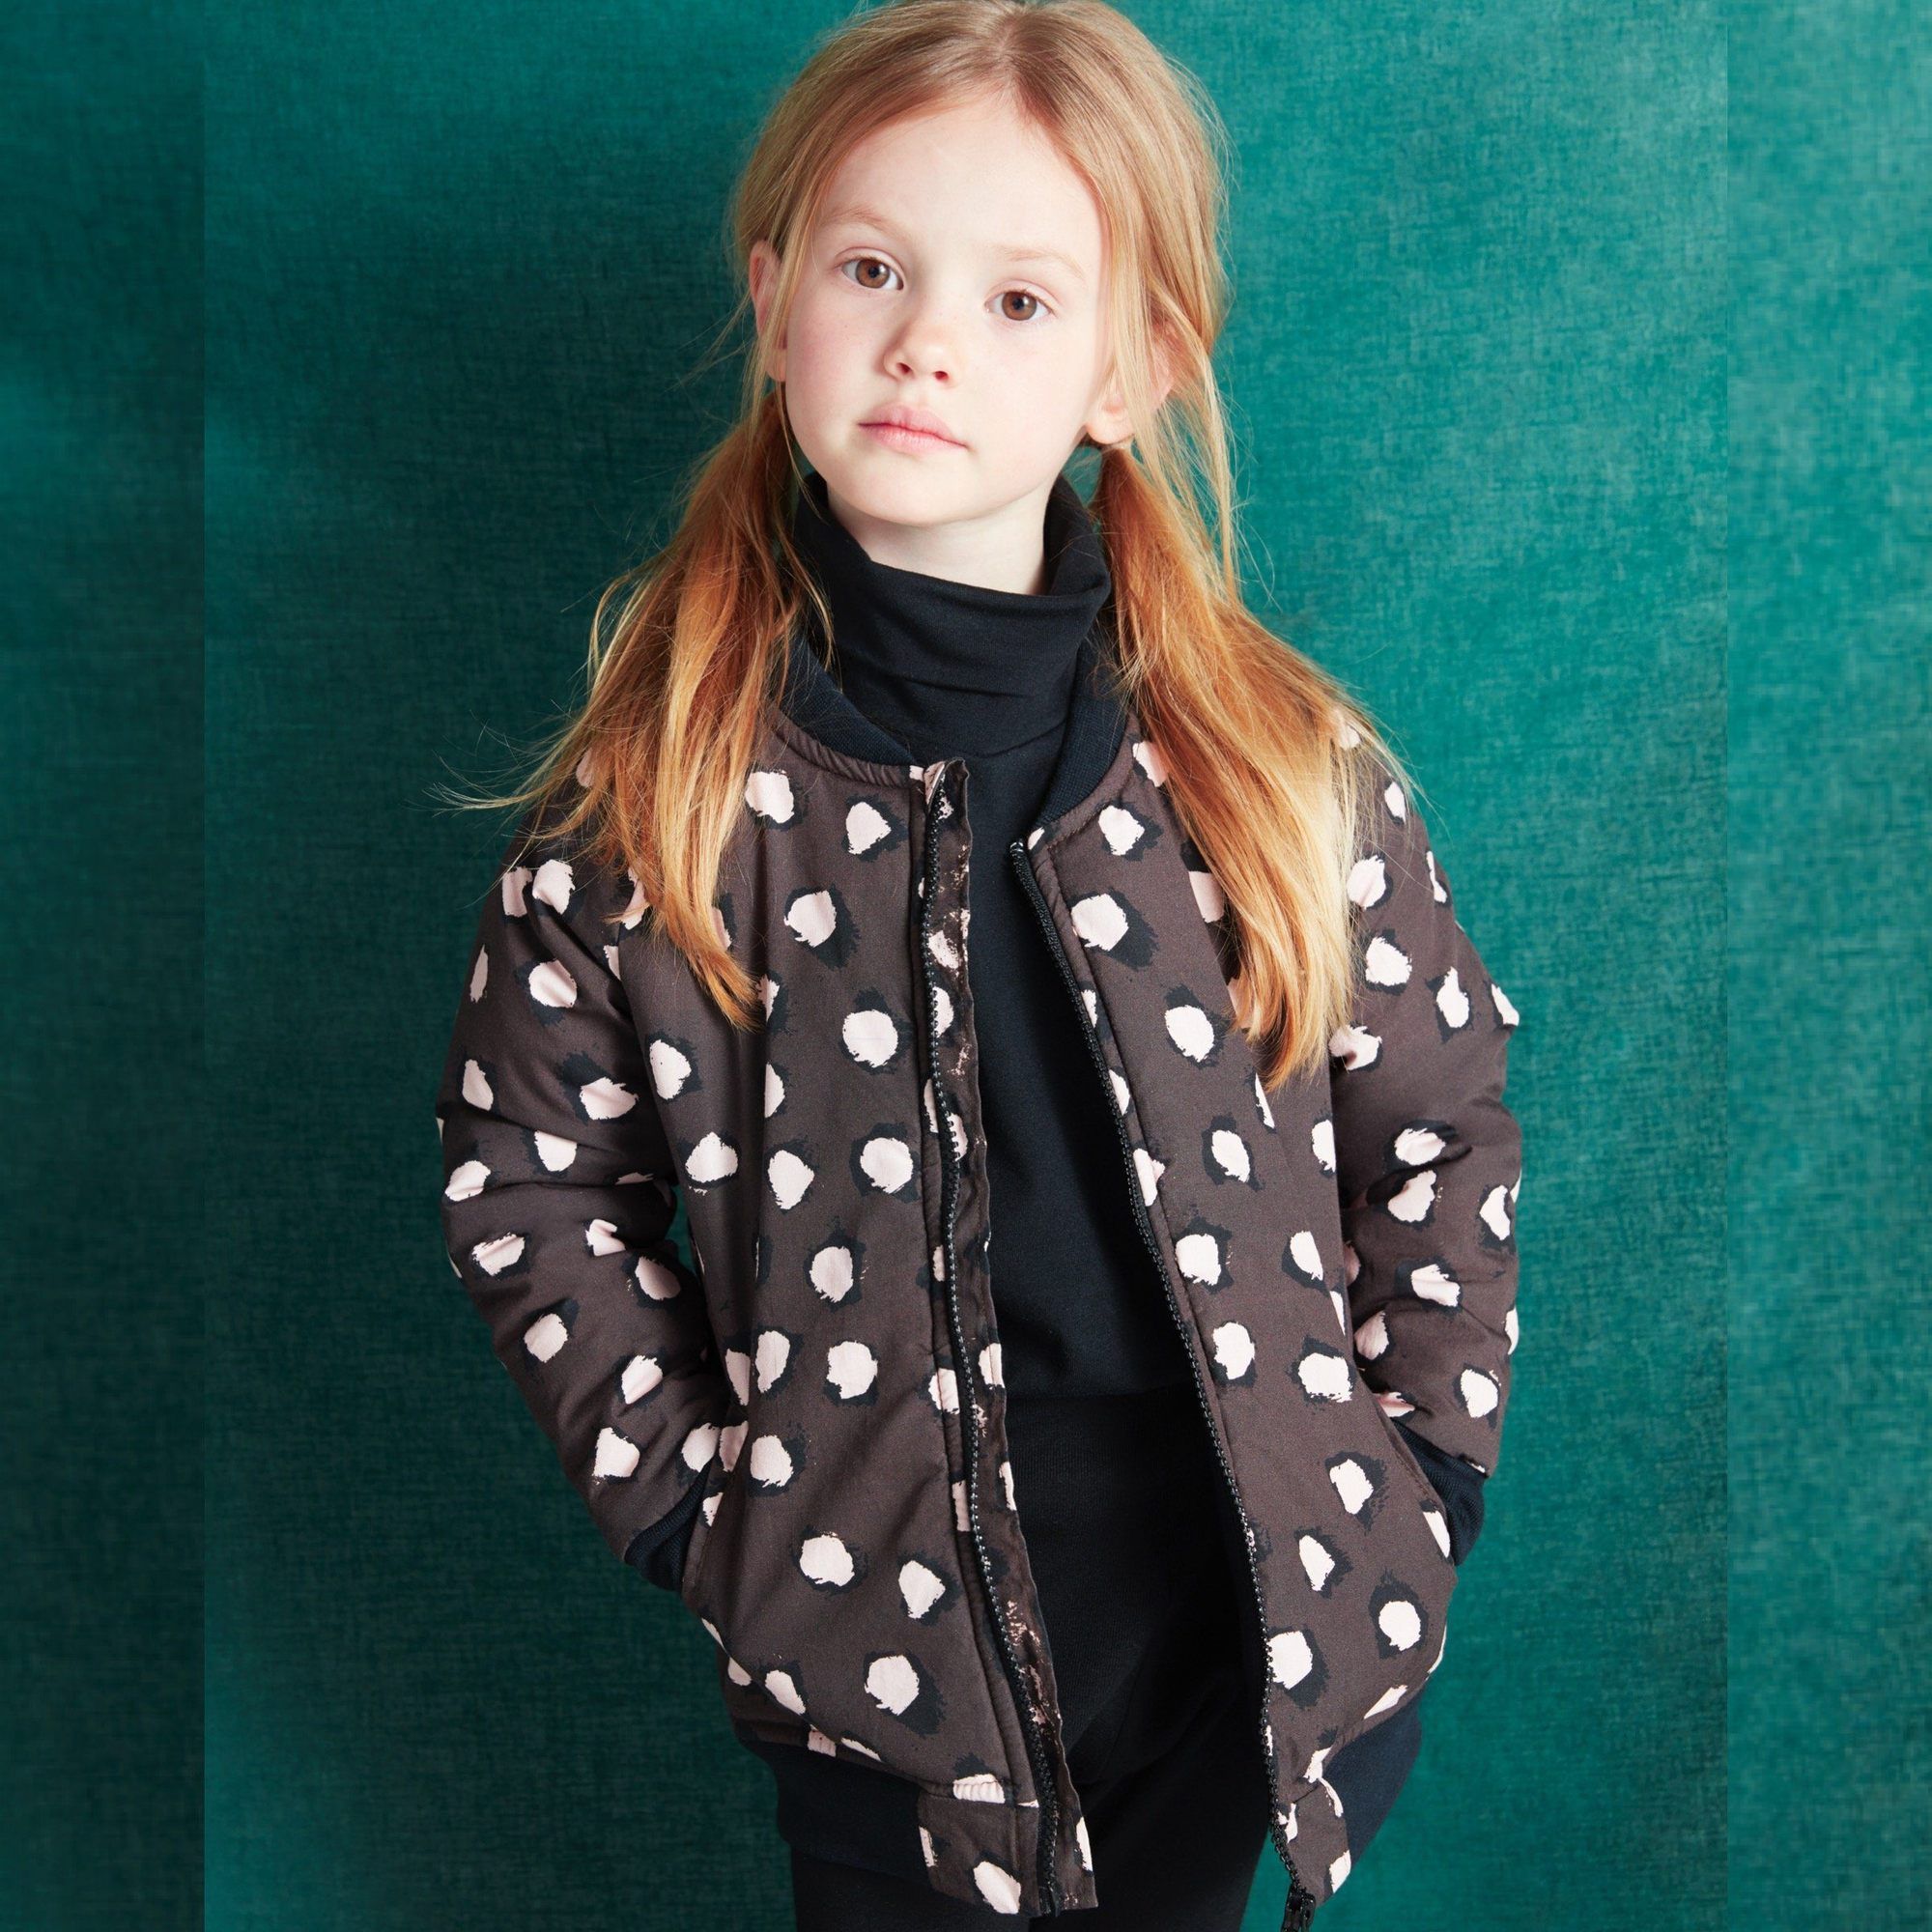 Lightweight cotton bomber jacket in brown featuring our all over painted dot print in pink and black. Inside lining and ribbed collar in matching black jersey to give our little ones extra warmth and comfort. Features zip opening front for ease of dressing and front pockets. Designed to be unisex.